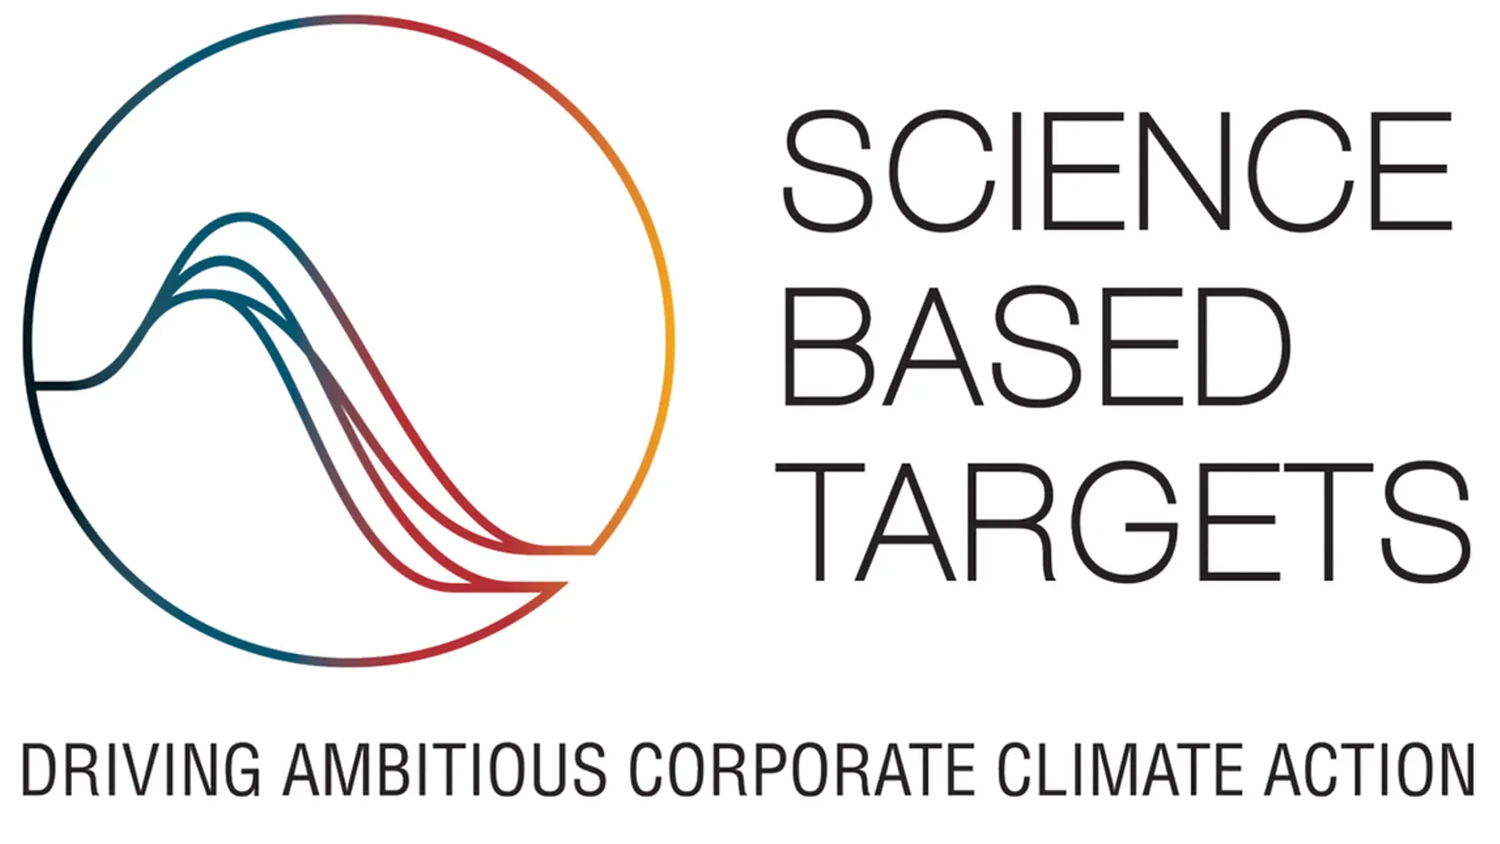 The Science Basted Targets logo